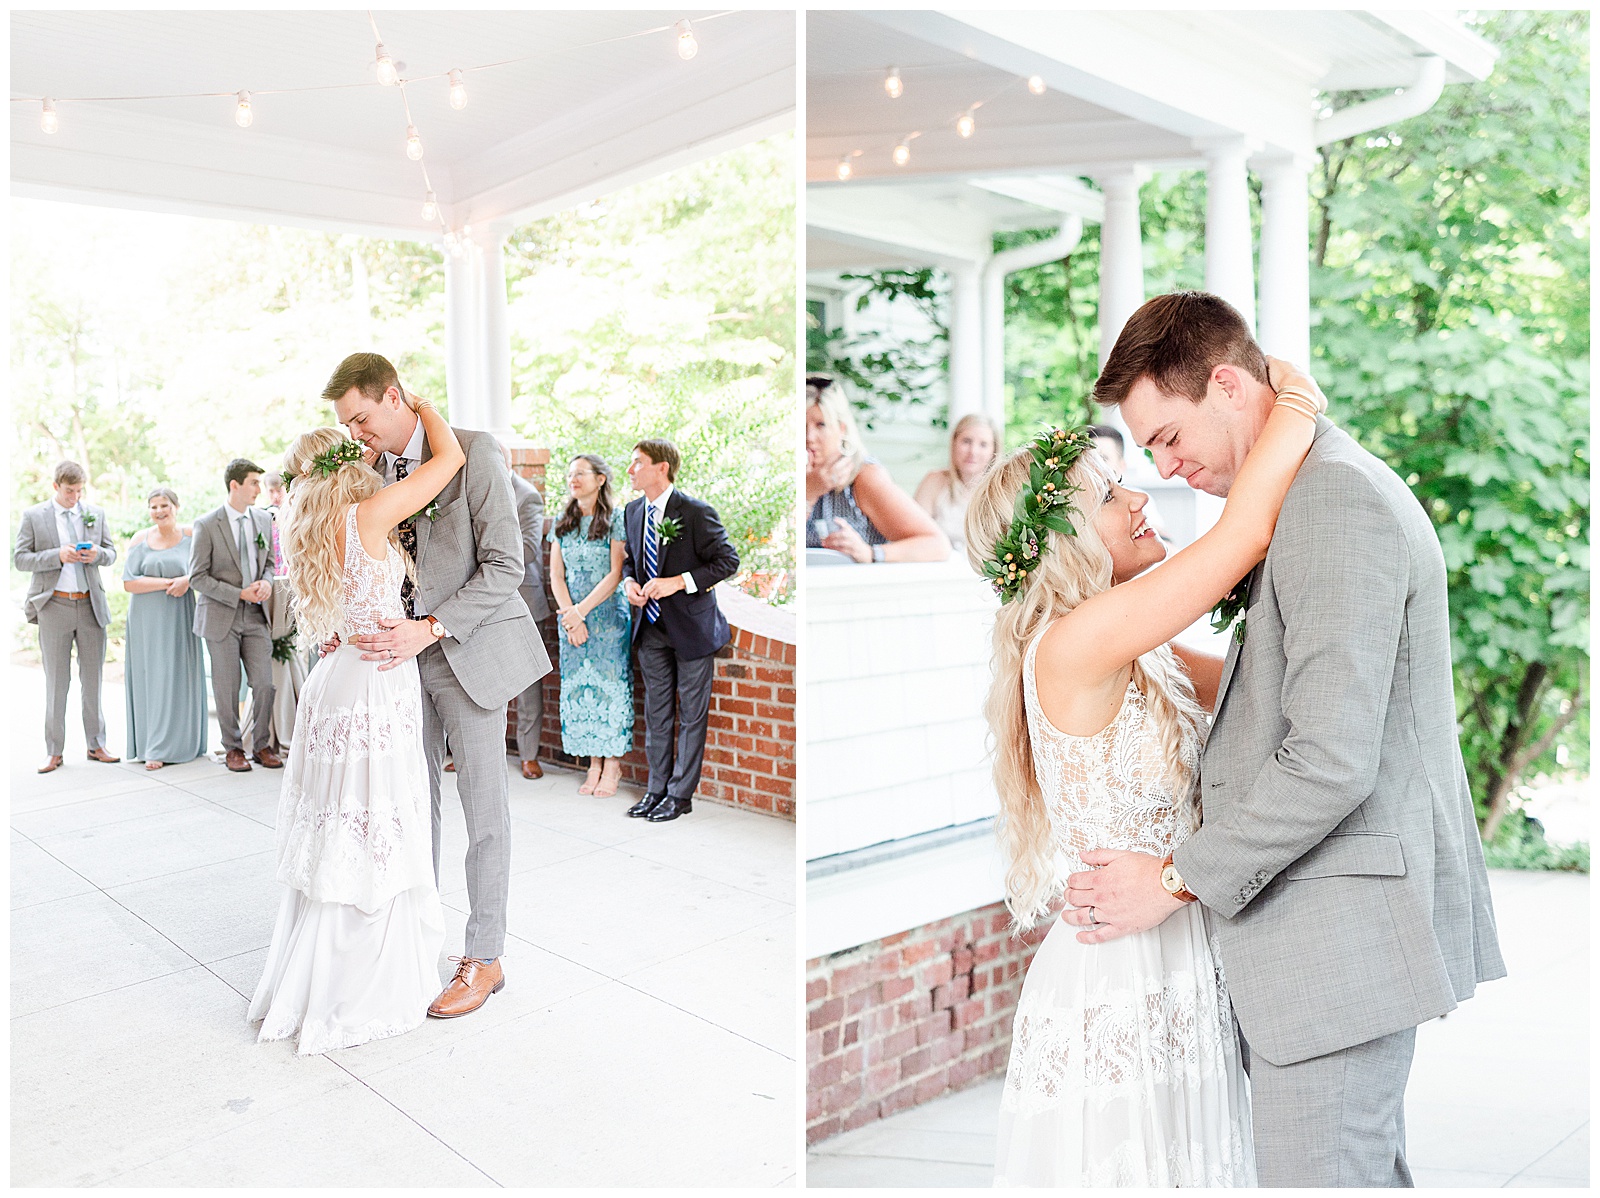 Emotional Bohemian Bride and Groom first dance from Boho Chic Summer Wedding in Charlotte, NC | check out the full wedding at KevynDixonPhoto.com